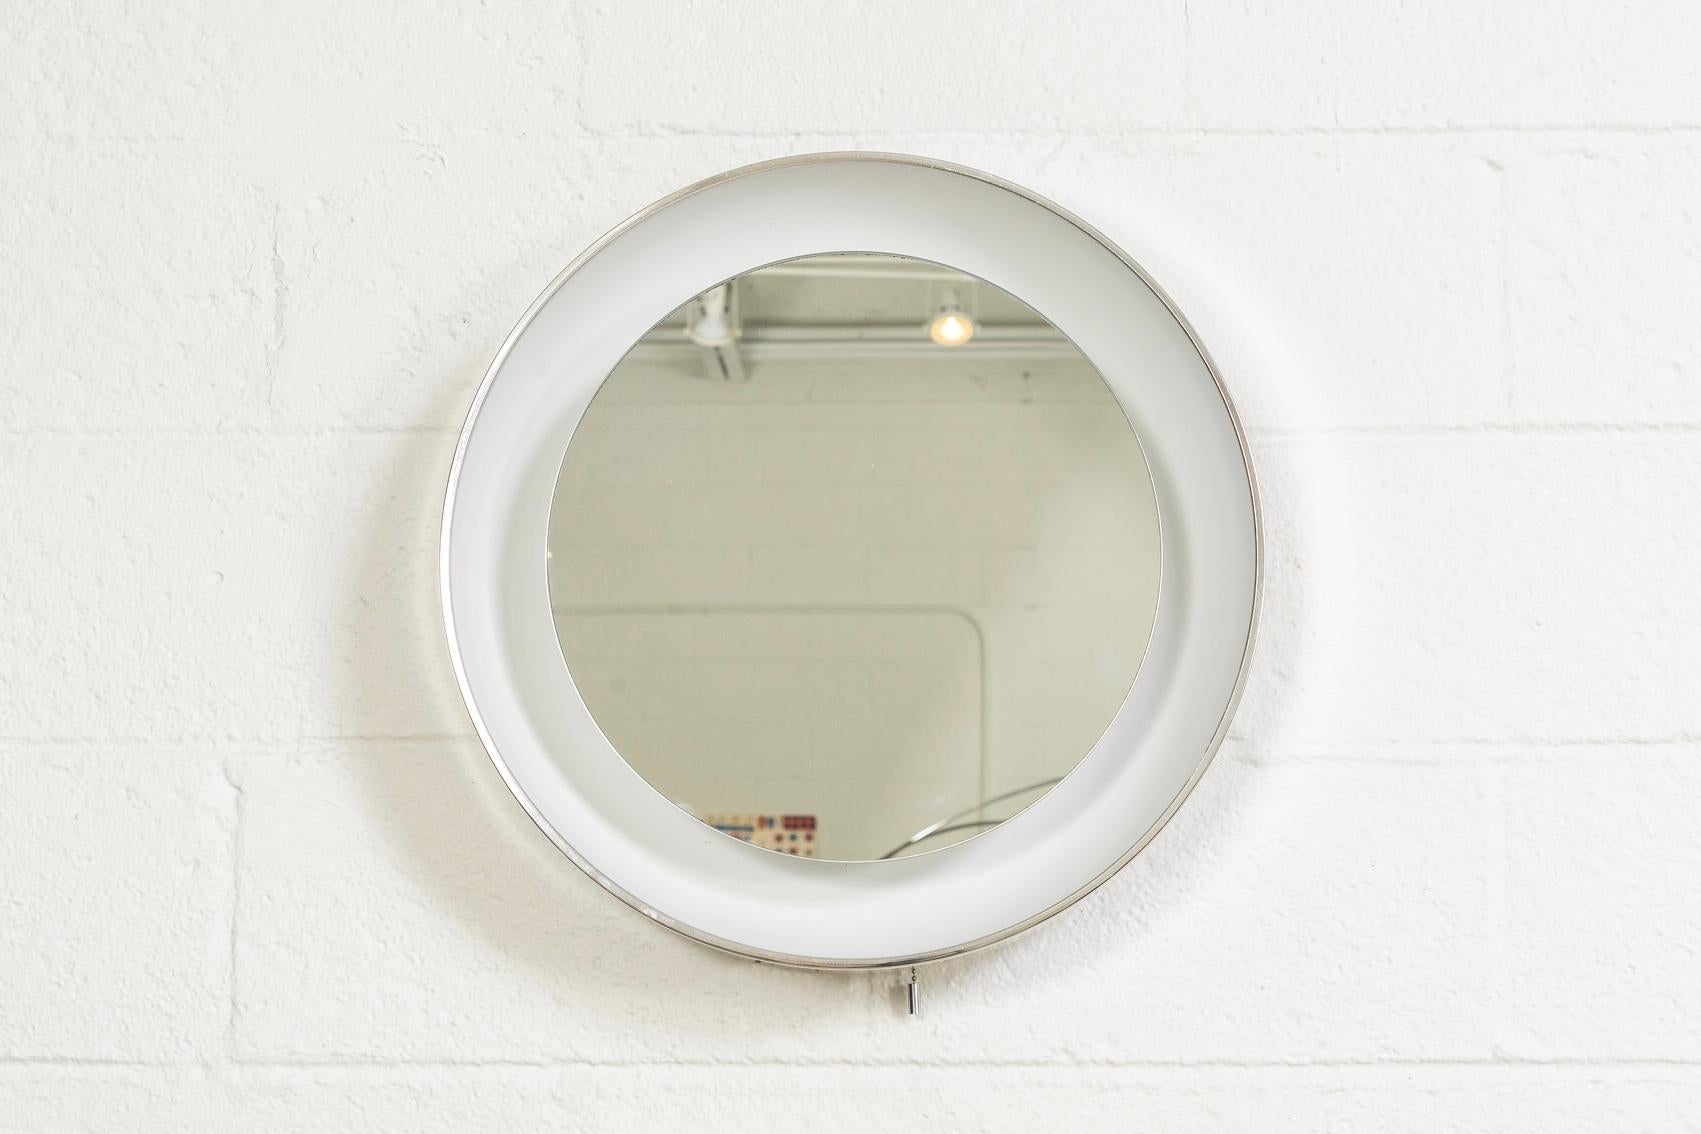 This Mid-Century Modern Lightolier illuminated wall or vanity mirror is circa 1970 and features a large plastic frame with reflective white interior and polished aluminum outer edge. The original 15” mirror glass floats in the centre of the frame.